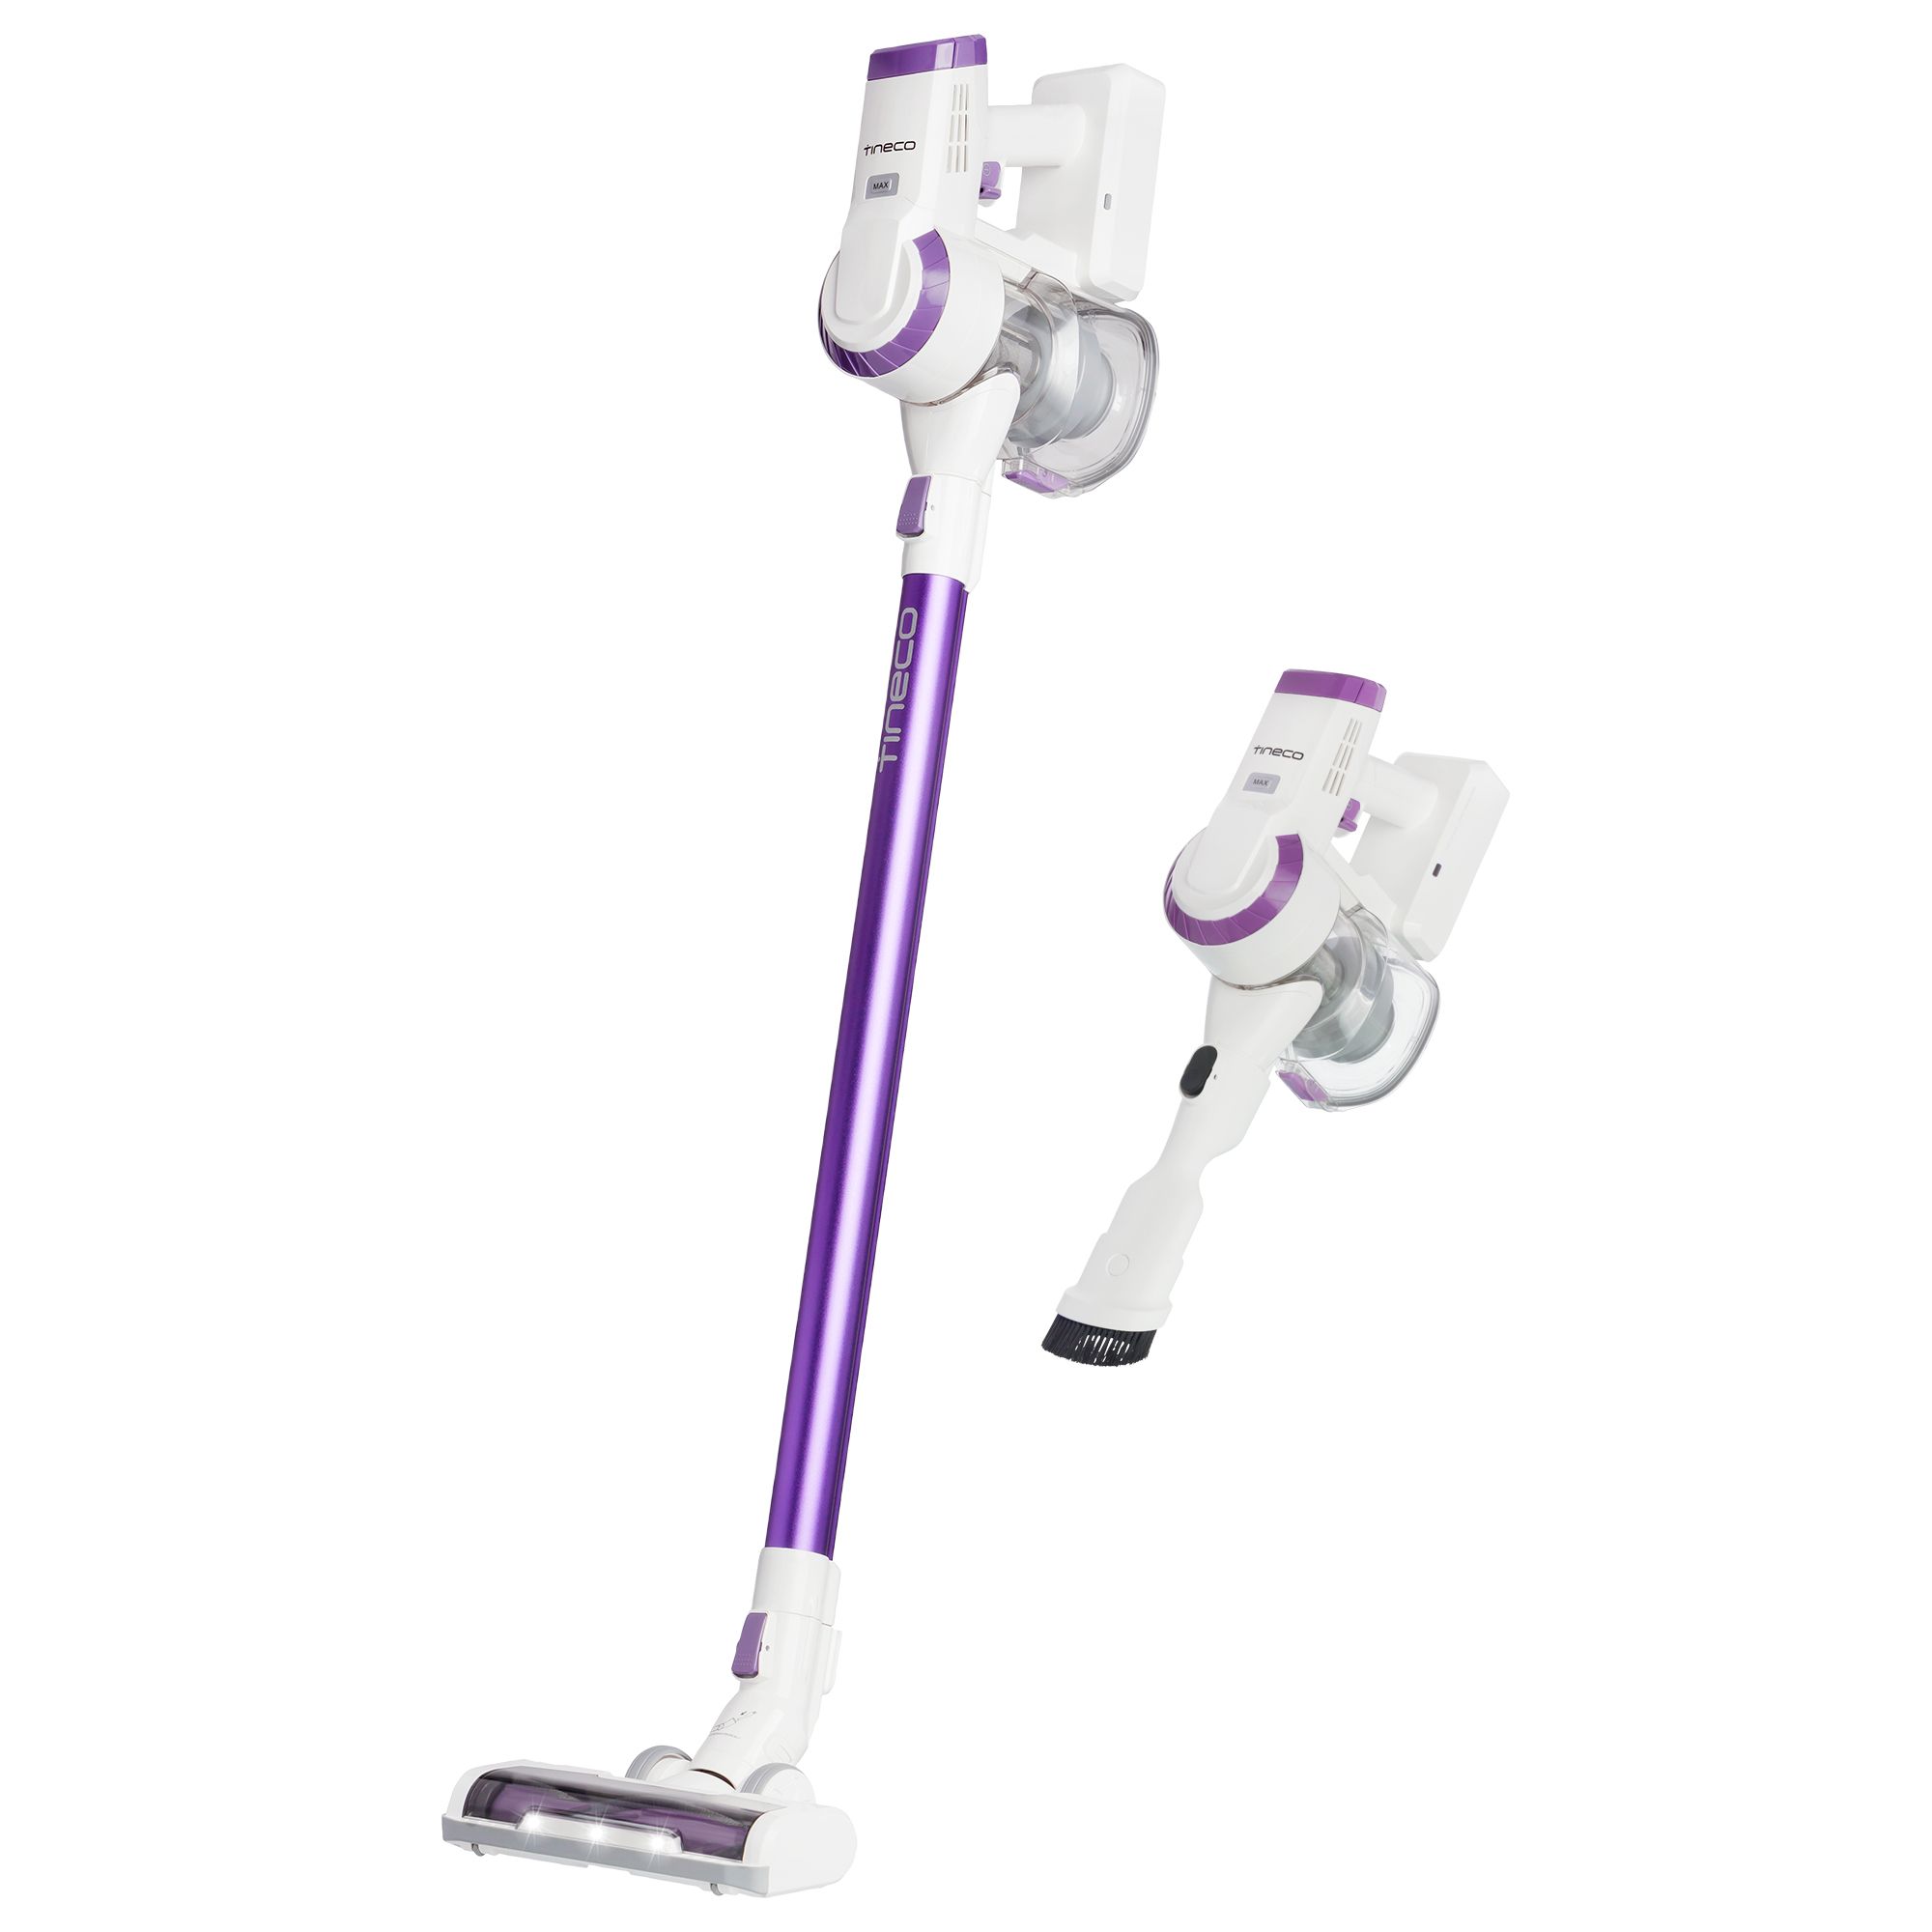 Tineco A10-D Lightweight Cordless Stick Vacuum Cleaner for Hardwood Floors & Low-Pile Rugs - image 1 of 9